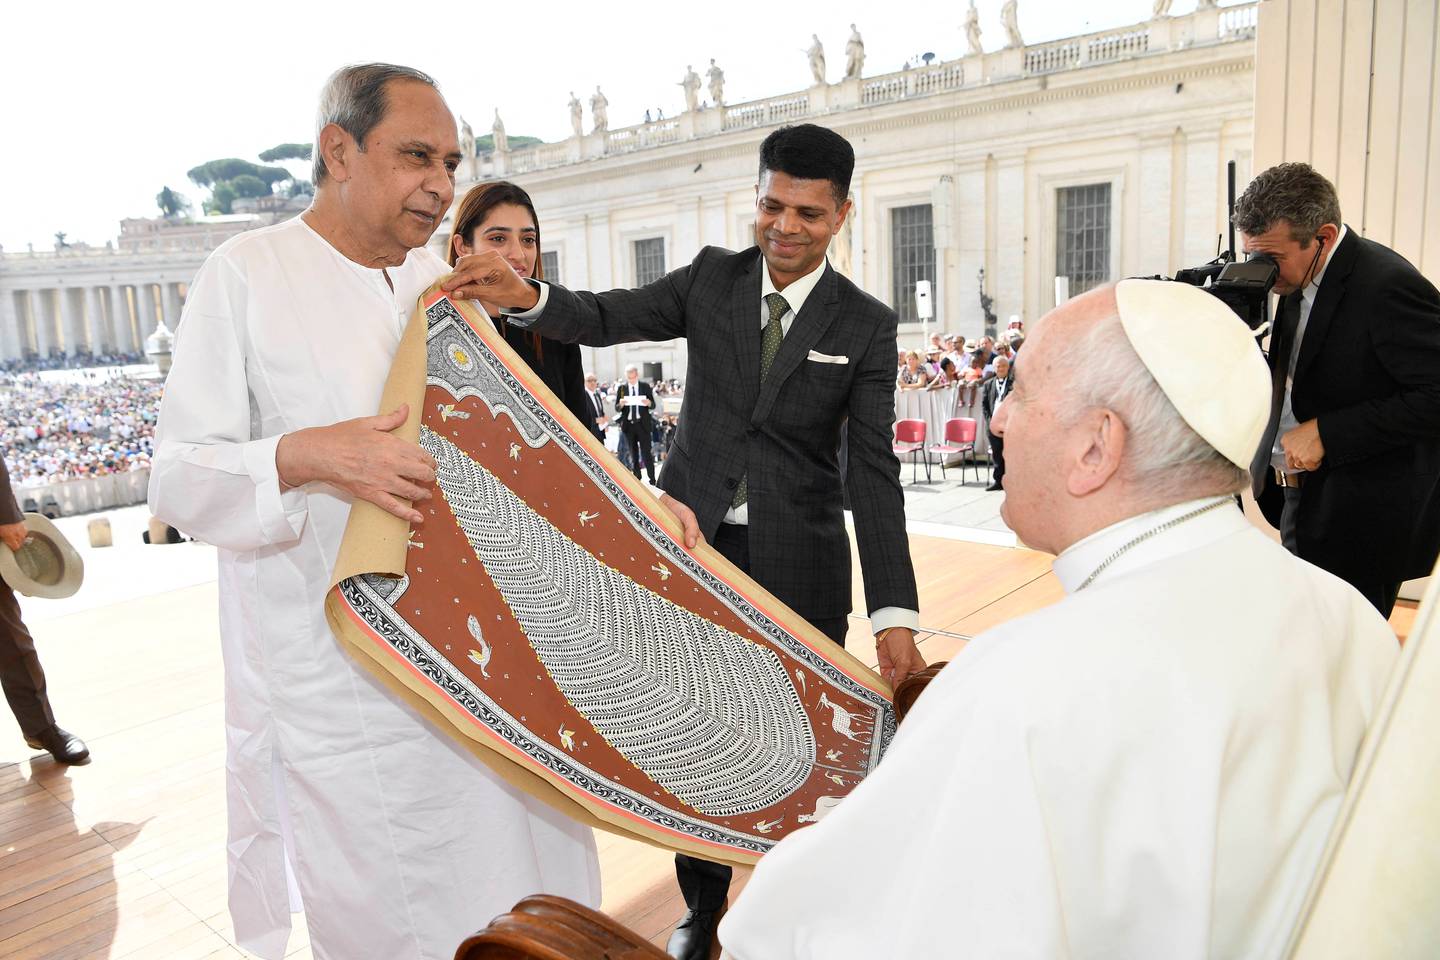 Pope Francis meets Odisha Chief Minister Naveen Patnaik at the Vatican on June 22.  Patnaik is from a political lineage, his father Biju Patnaik has also served as the Chief Minister.  Reuters